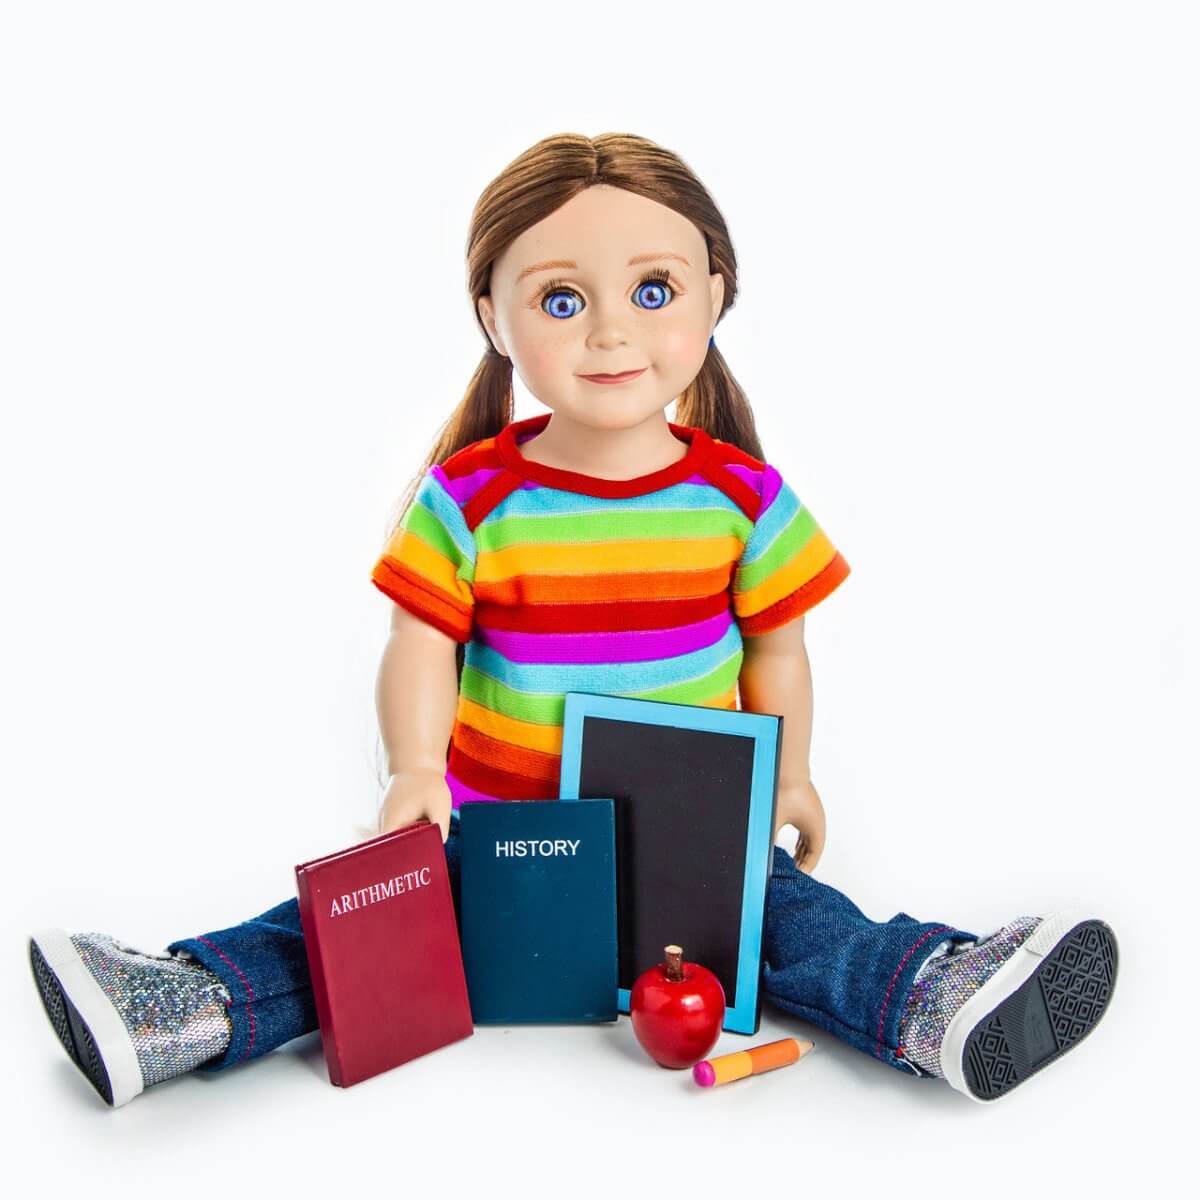 The Queen's Treasures 18-Inch Doll Accessory - School Supply Set